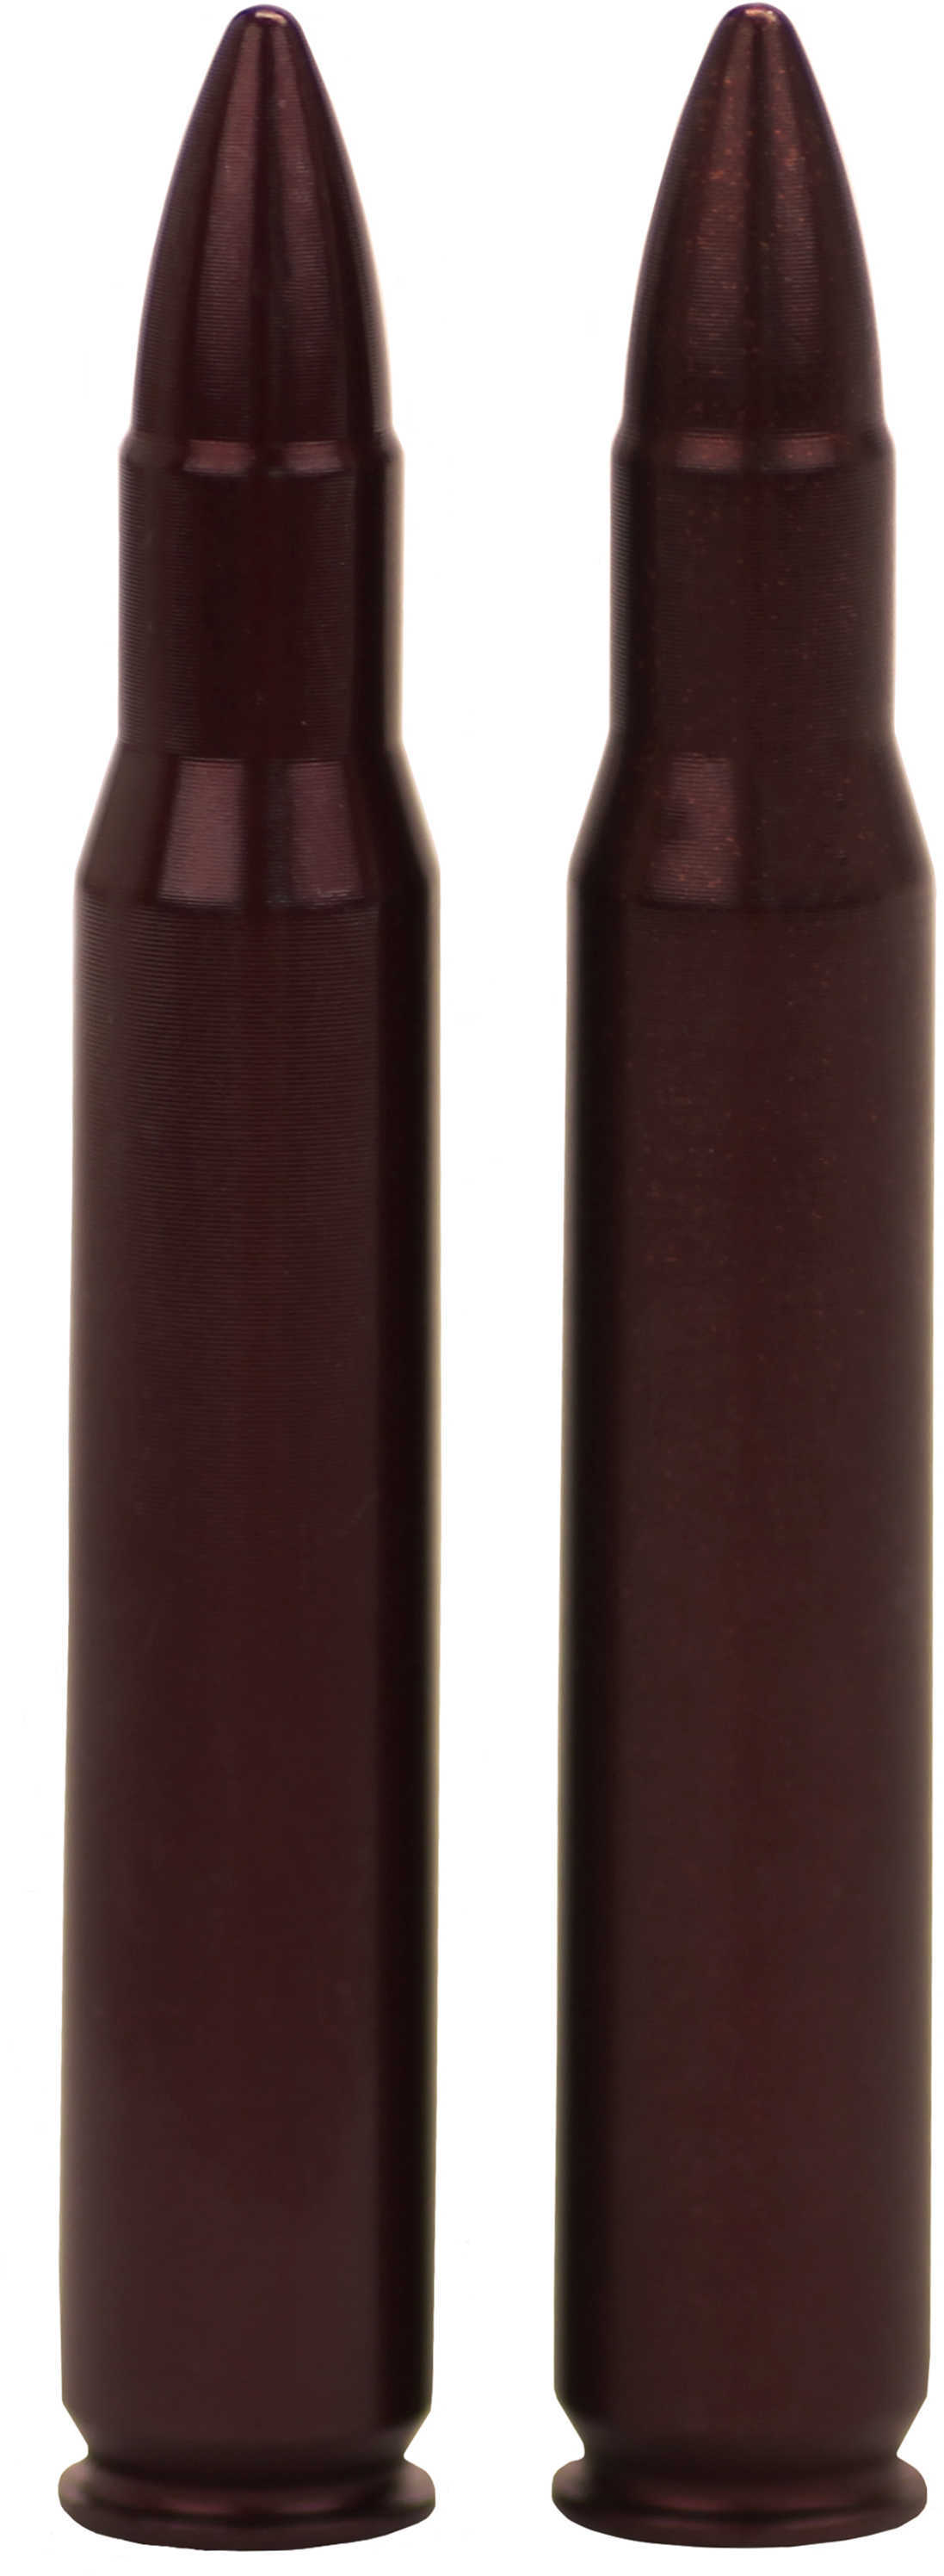 Pachmayr Rifle Metal Snap Caps 30-06 Springfield Per 2 Md: 12227